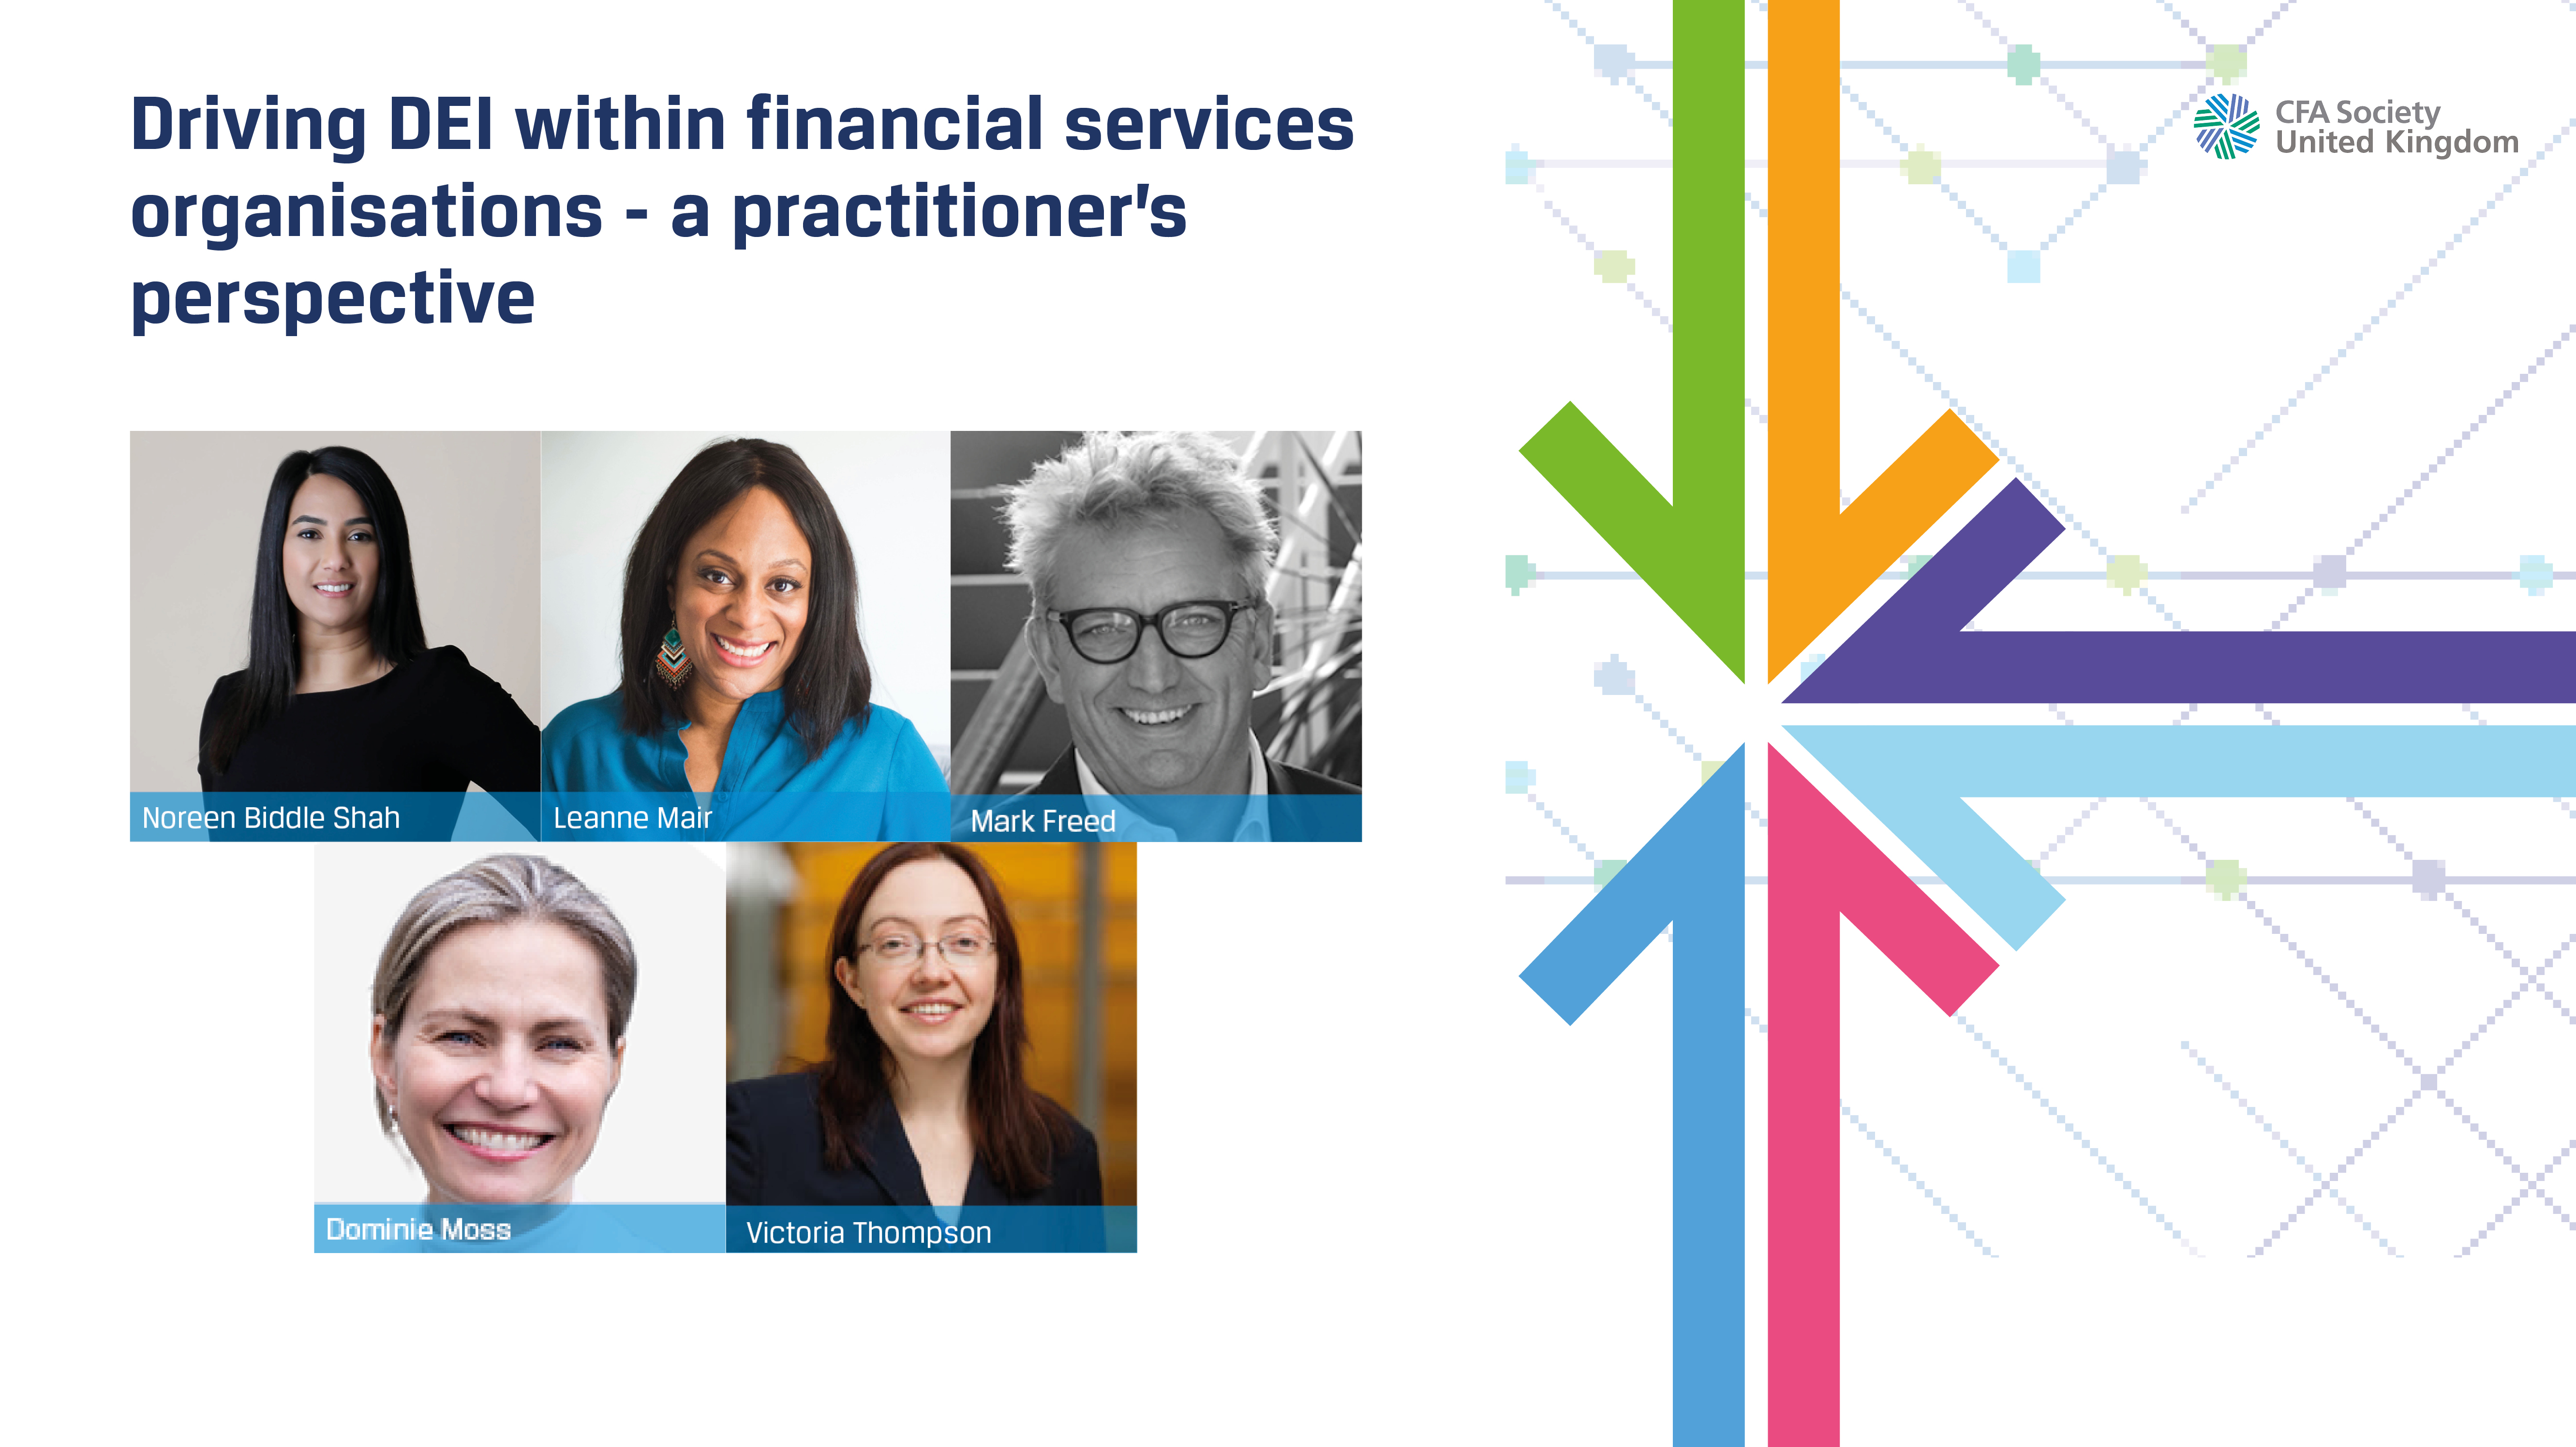 Driving DEI within financial services organisations - a practitioner's perspective 